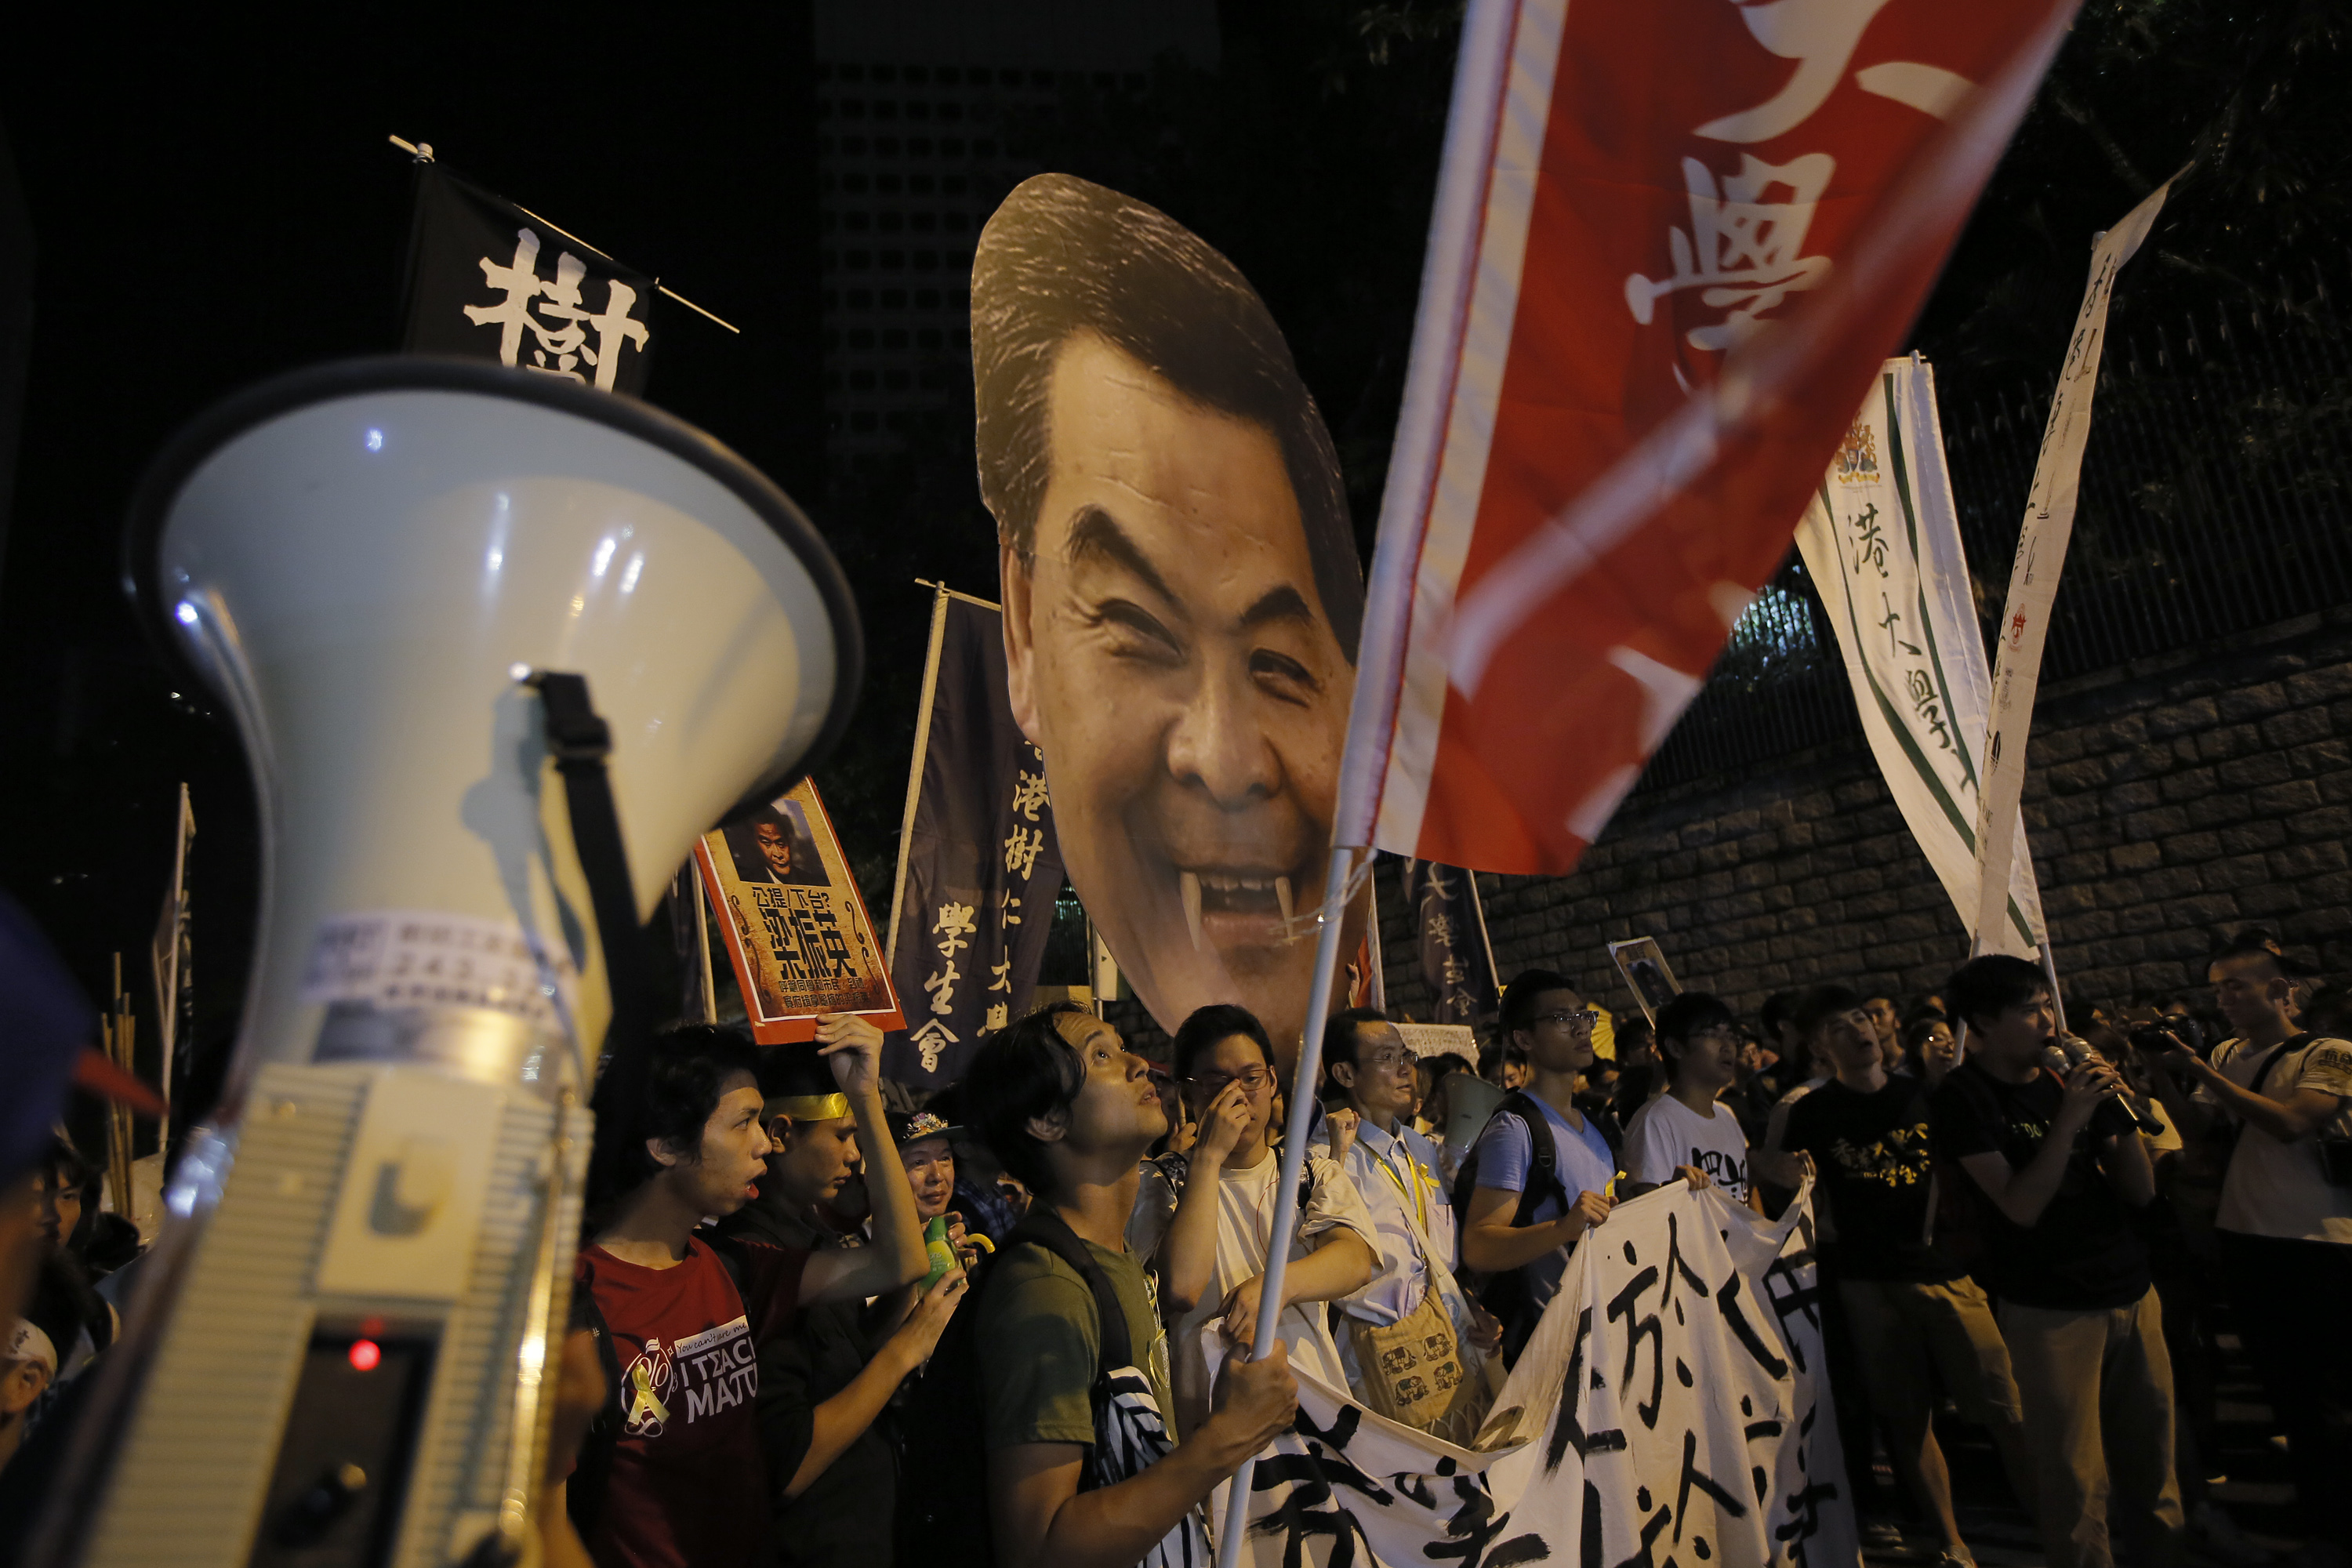 Students carry a defaced picture of Hong Kong Chief Executive Leung Chun-ying during a protest in Hong Kong on Sept. 25, 2014 (Vincent Yu&mdash;AP)